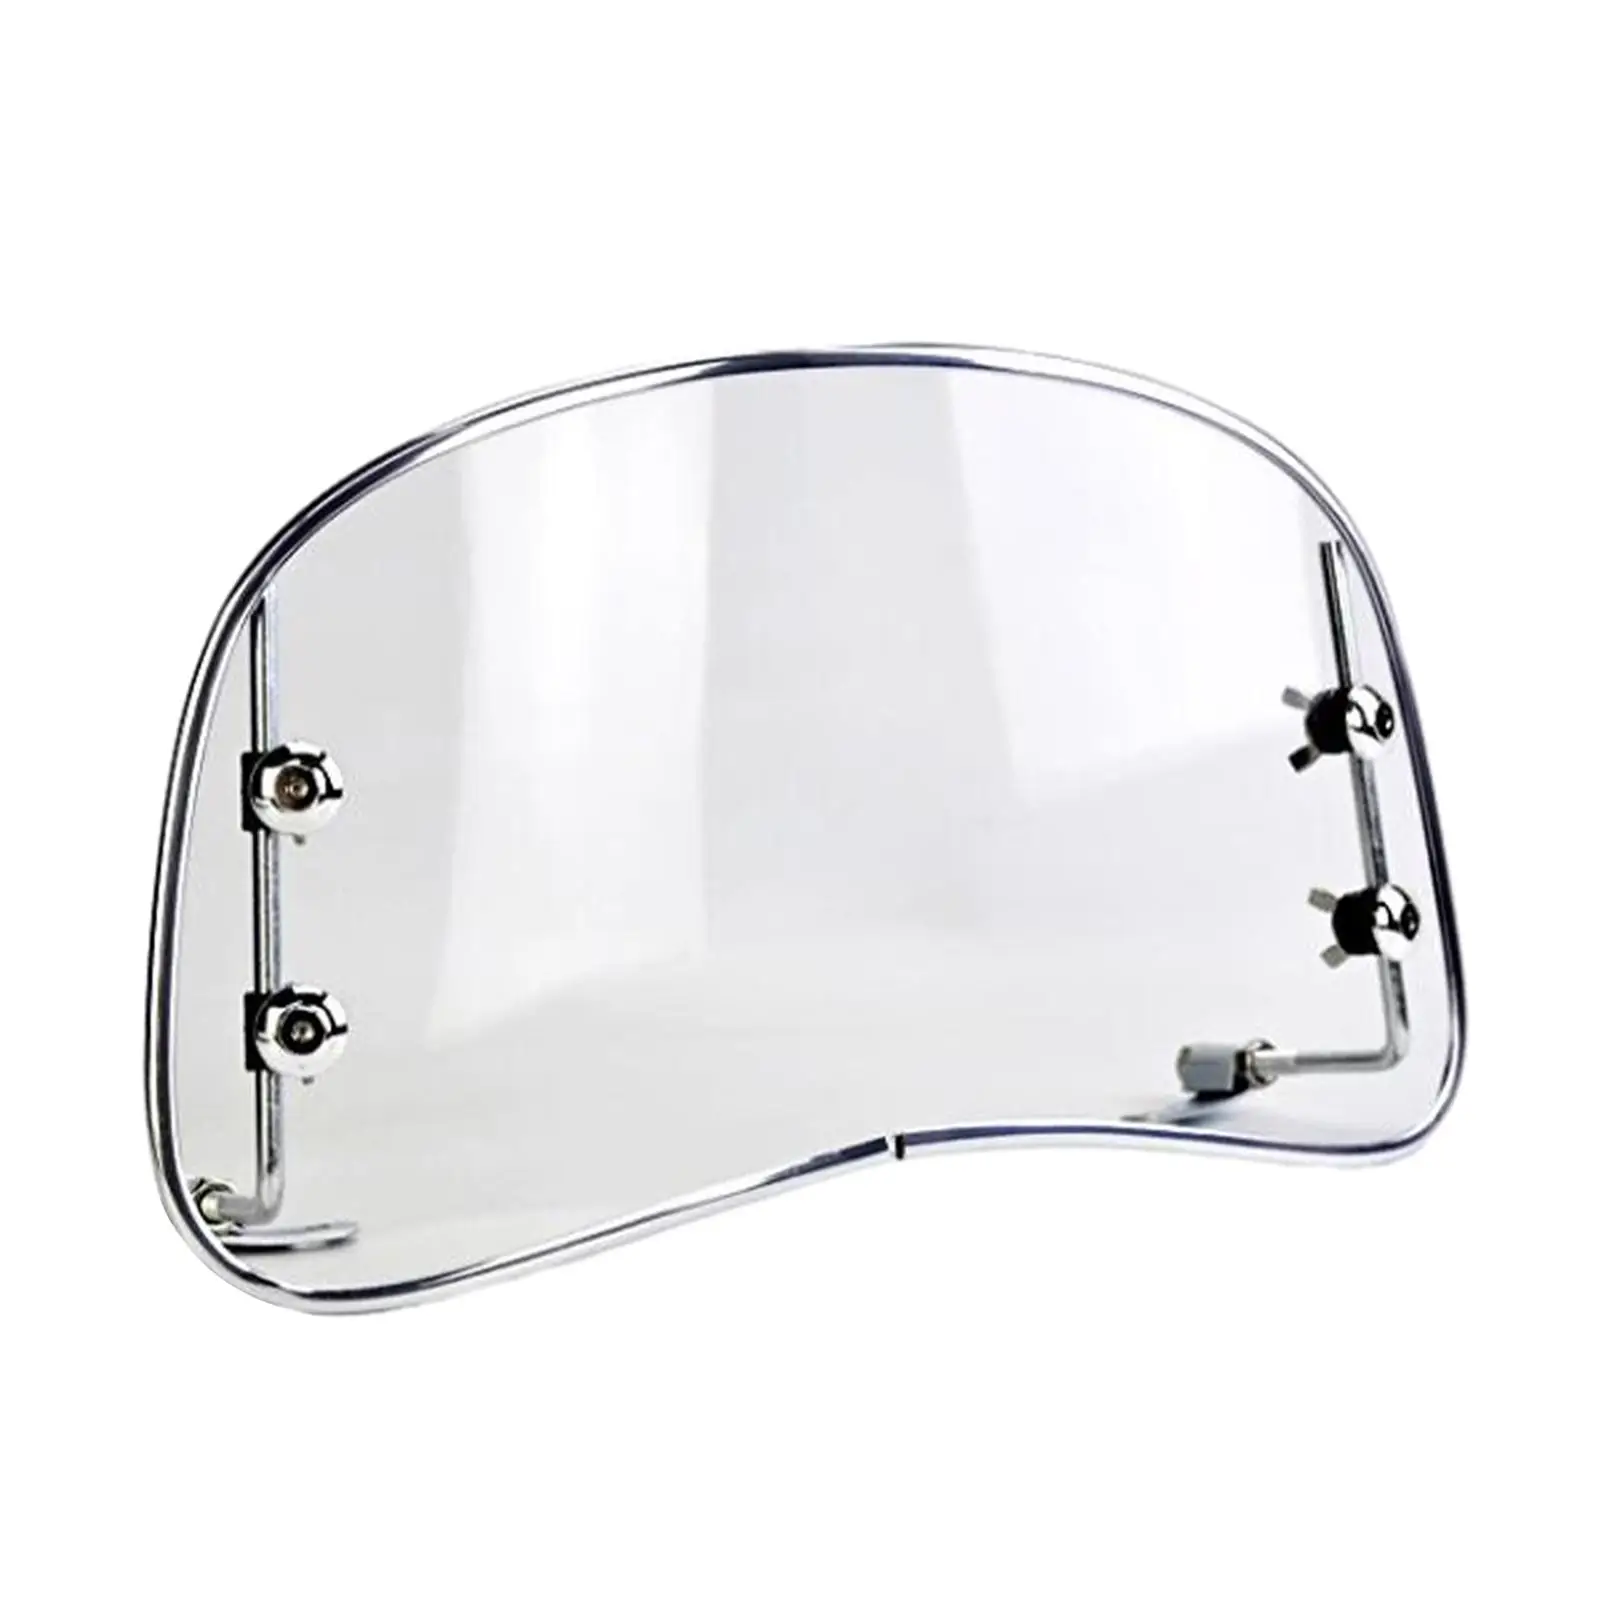 Motorbike Windshield Clear Front Screen Accessories 8.6inch Tall PC Material